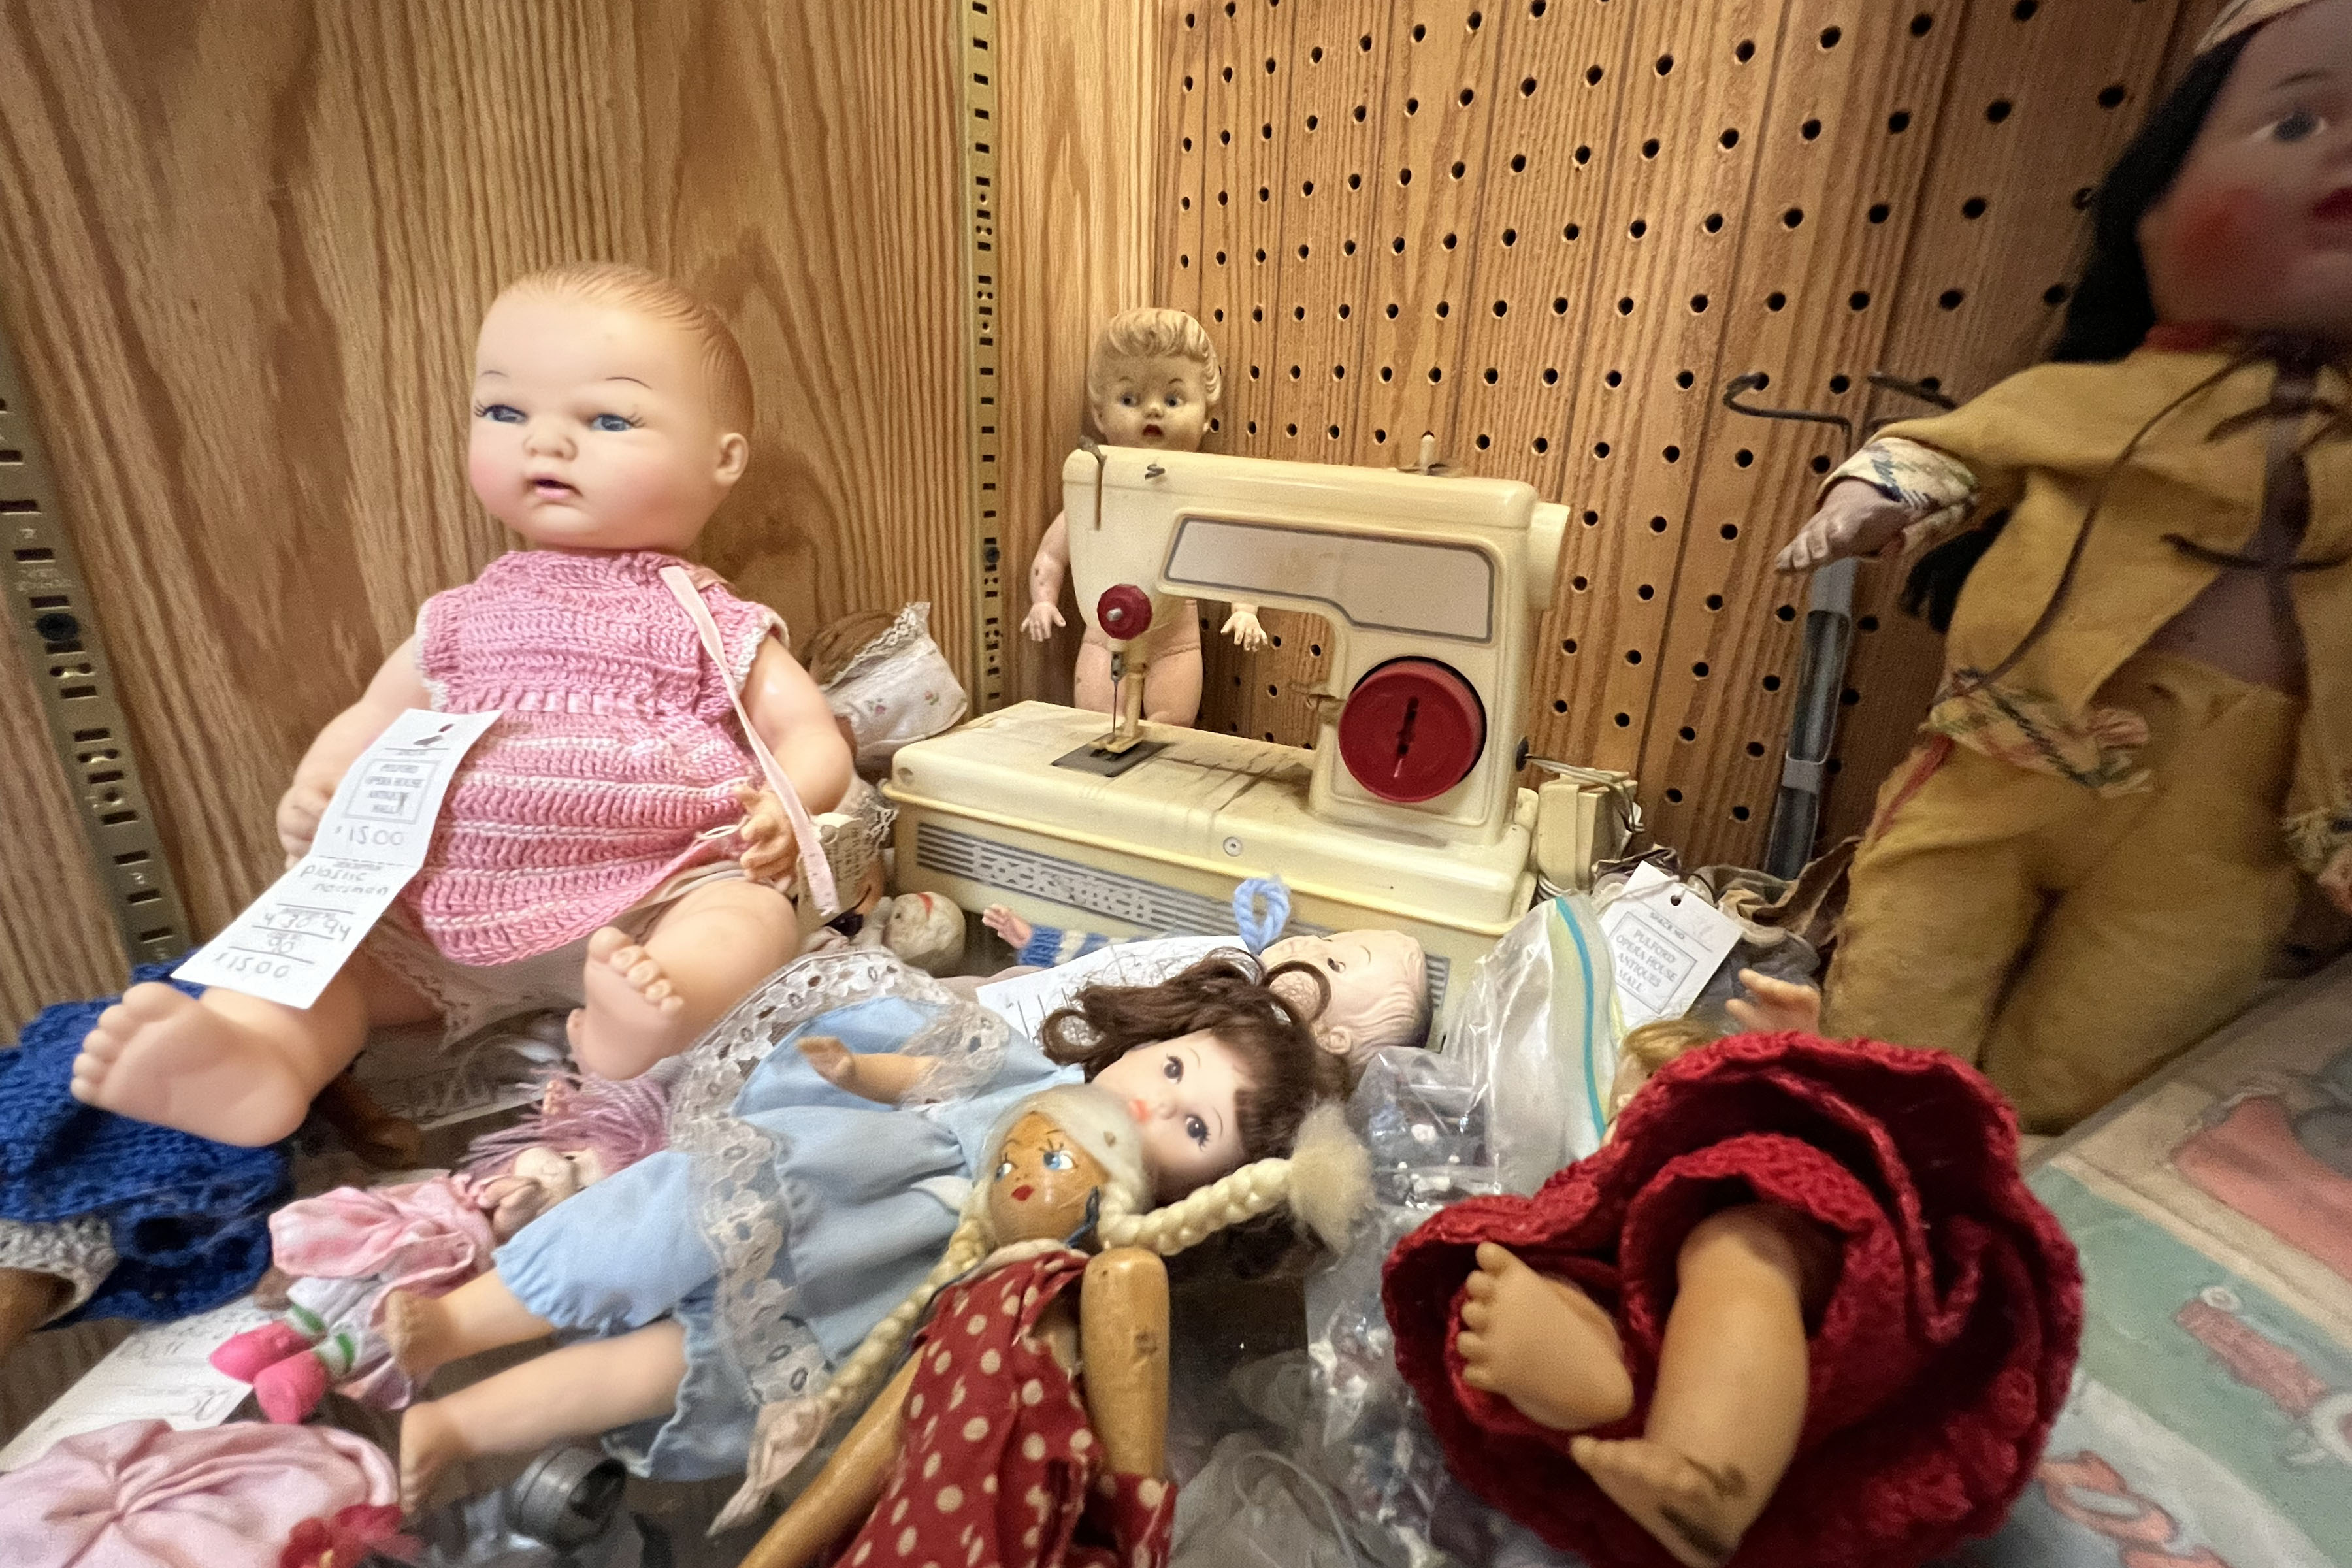 The baby doll in the pink will set customers back $1,500